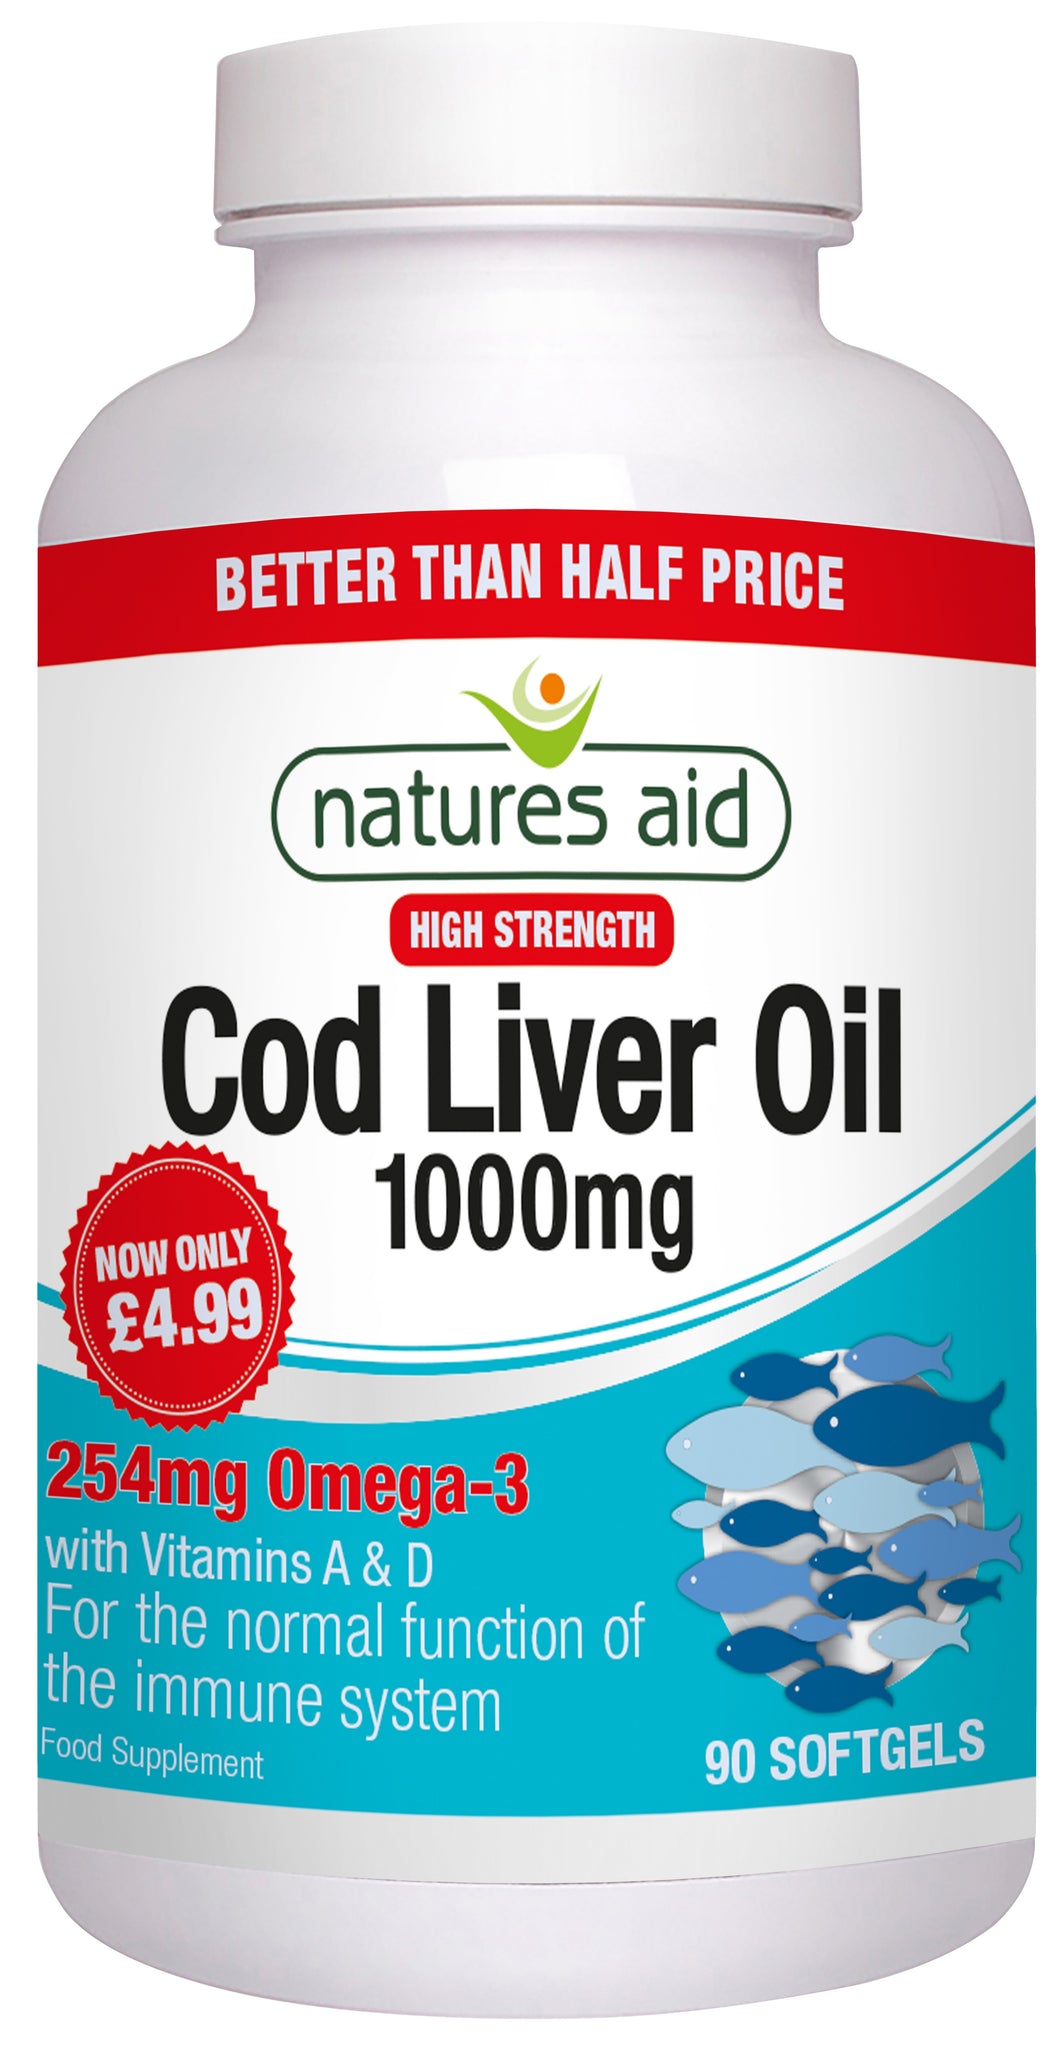 Natures Aid Cod Liver Oil (High Strength) 1000mg 90softgels